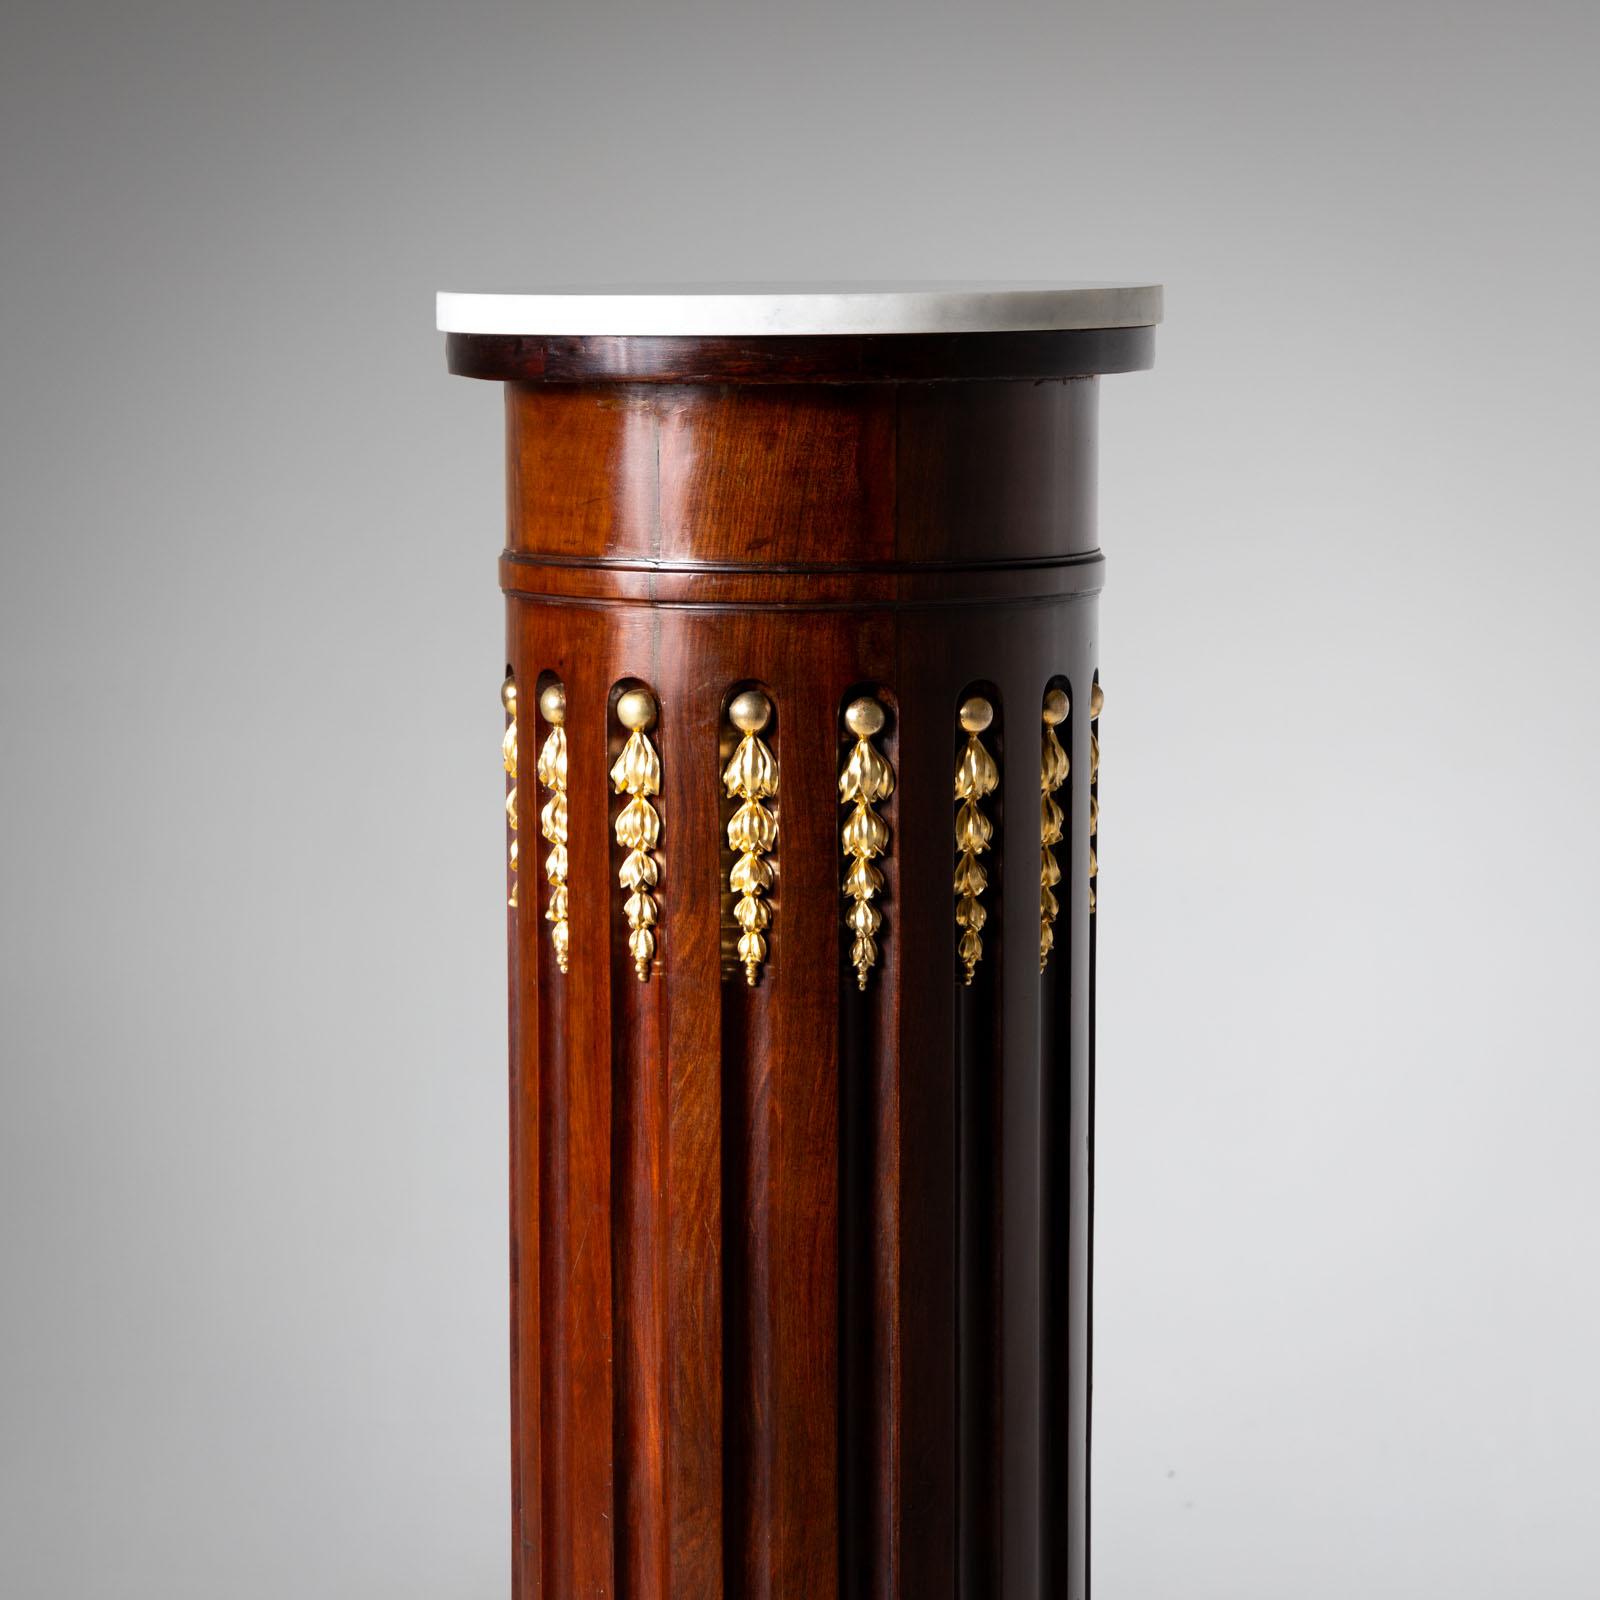 Marble Empire Column with fire-gilt Appliqués, 2nd Half 19th Century For Sale